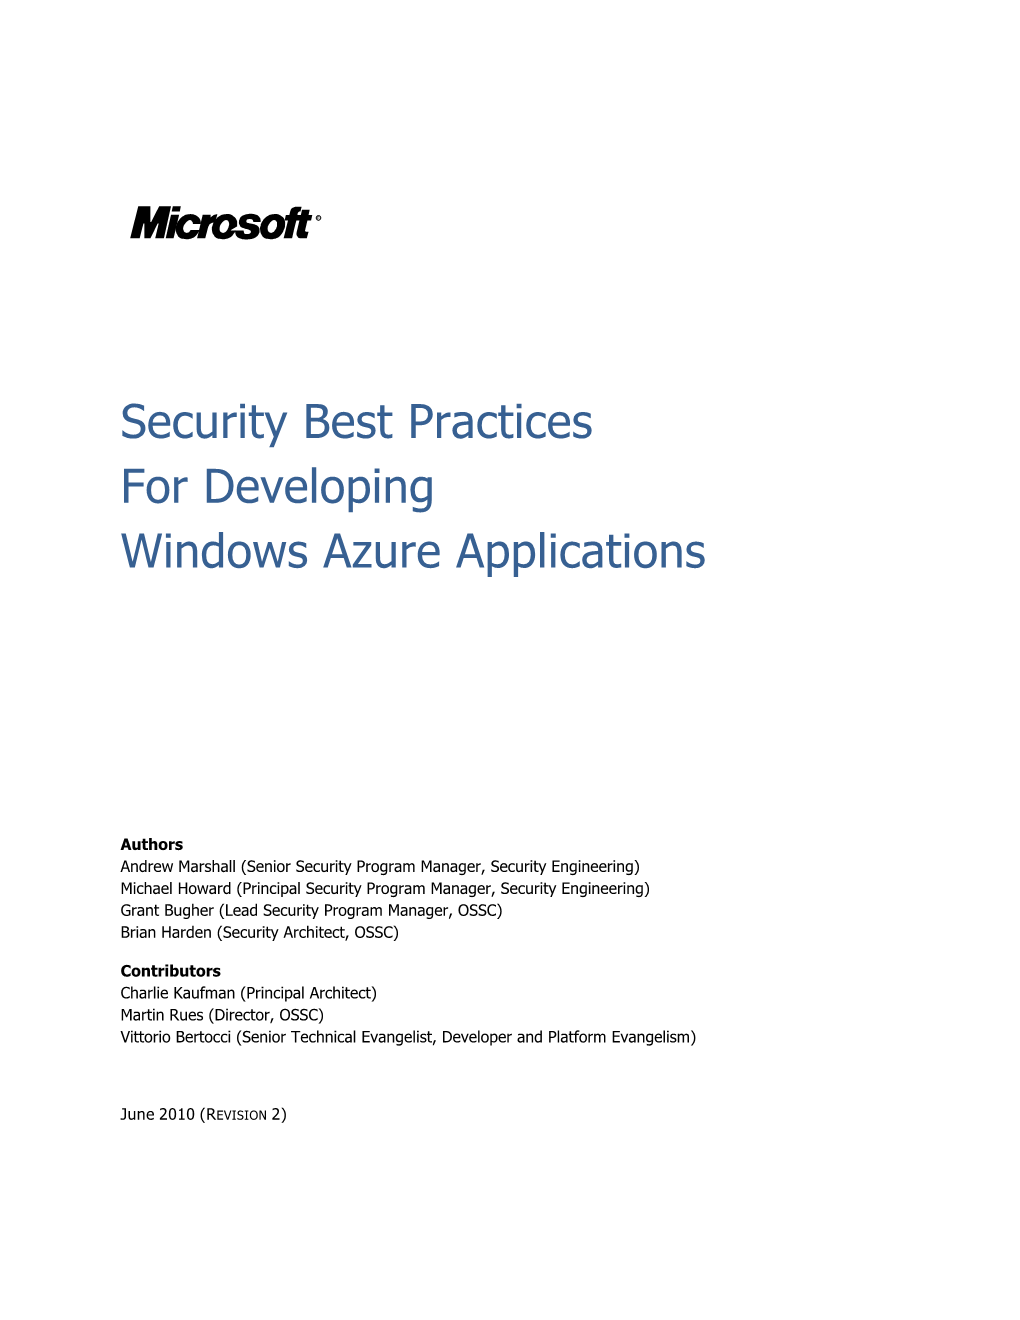 Security Best Practices for Developing Windows Azure Applications